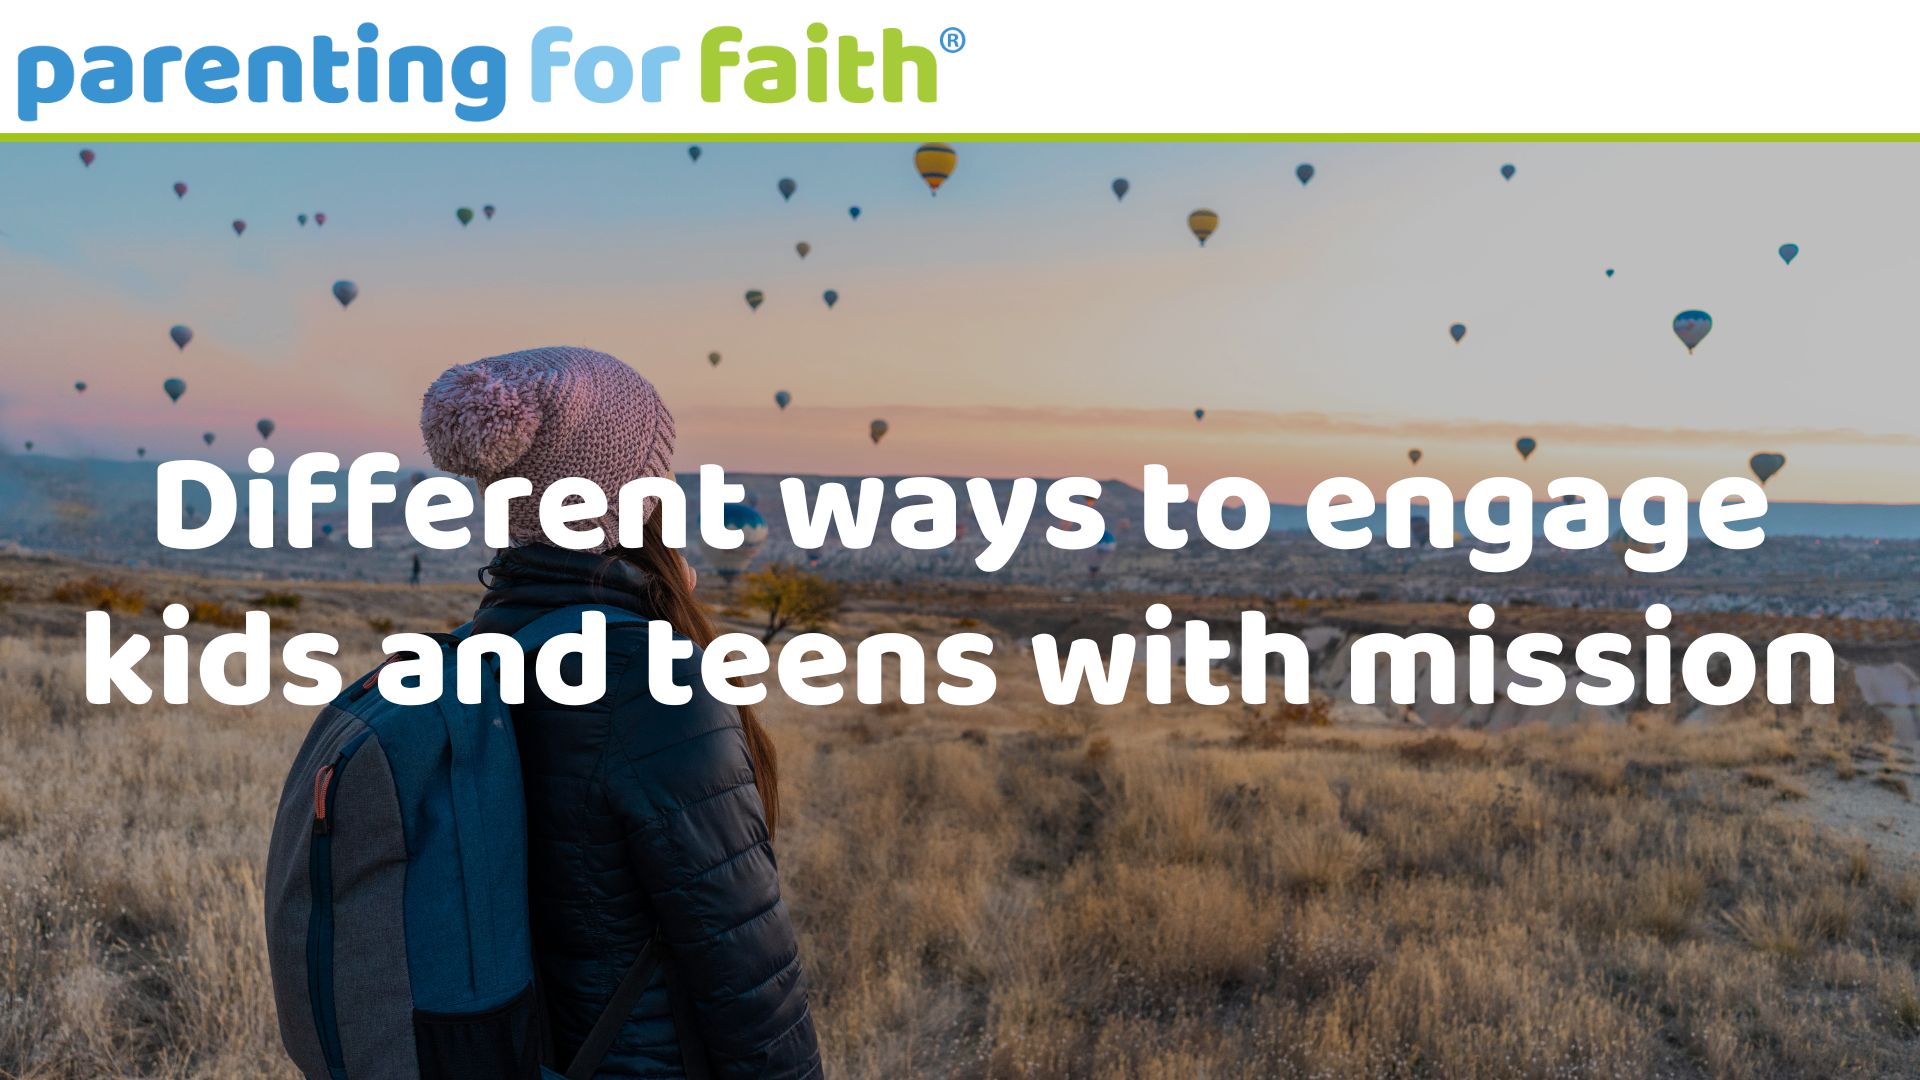 different ways to engage kids and teens with mission, image credit Oleksandr P from Pexels